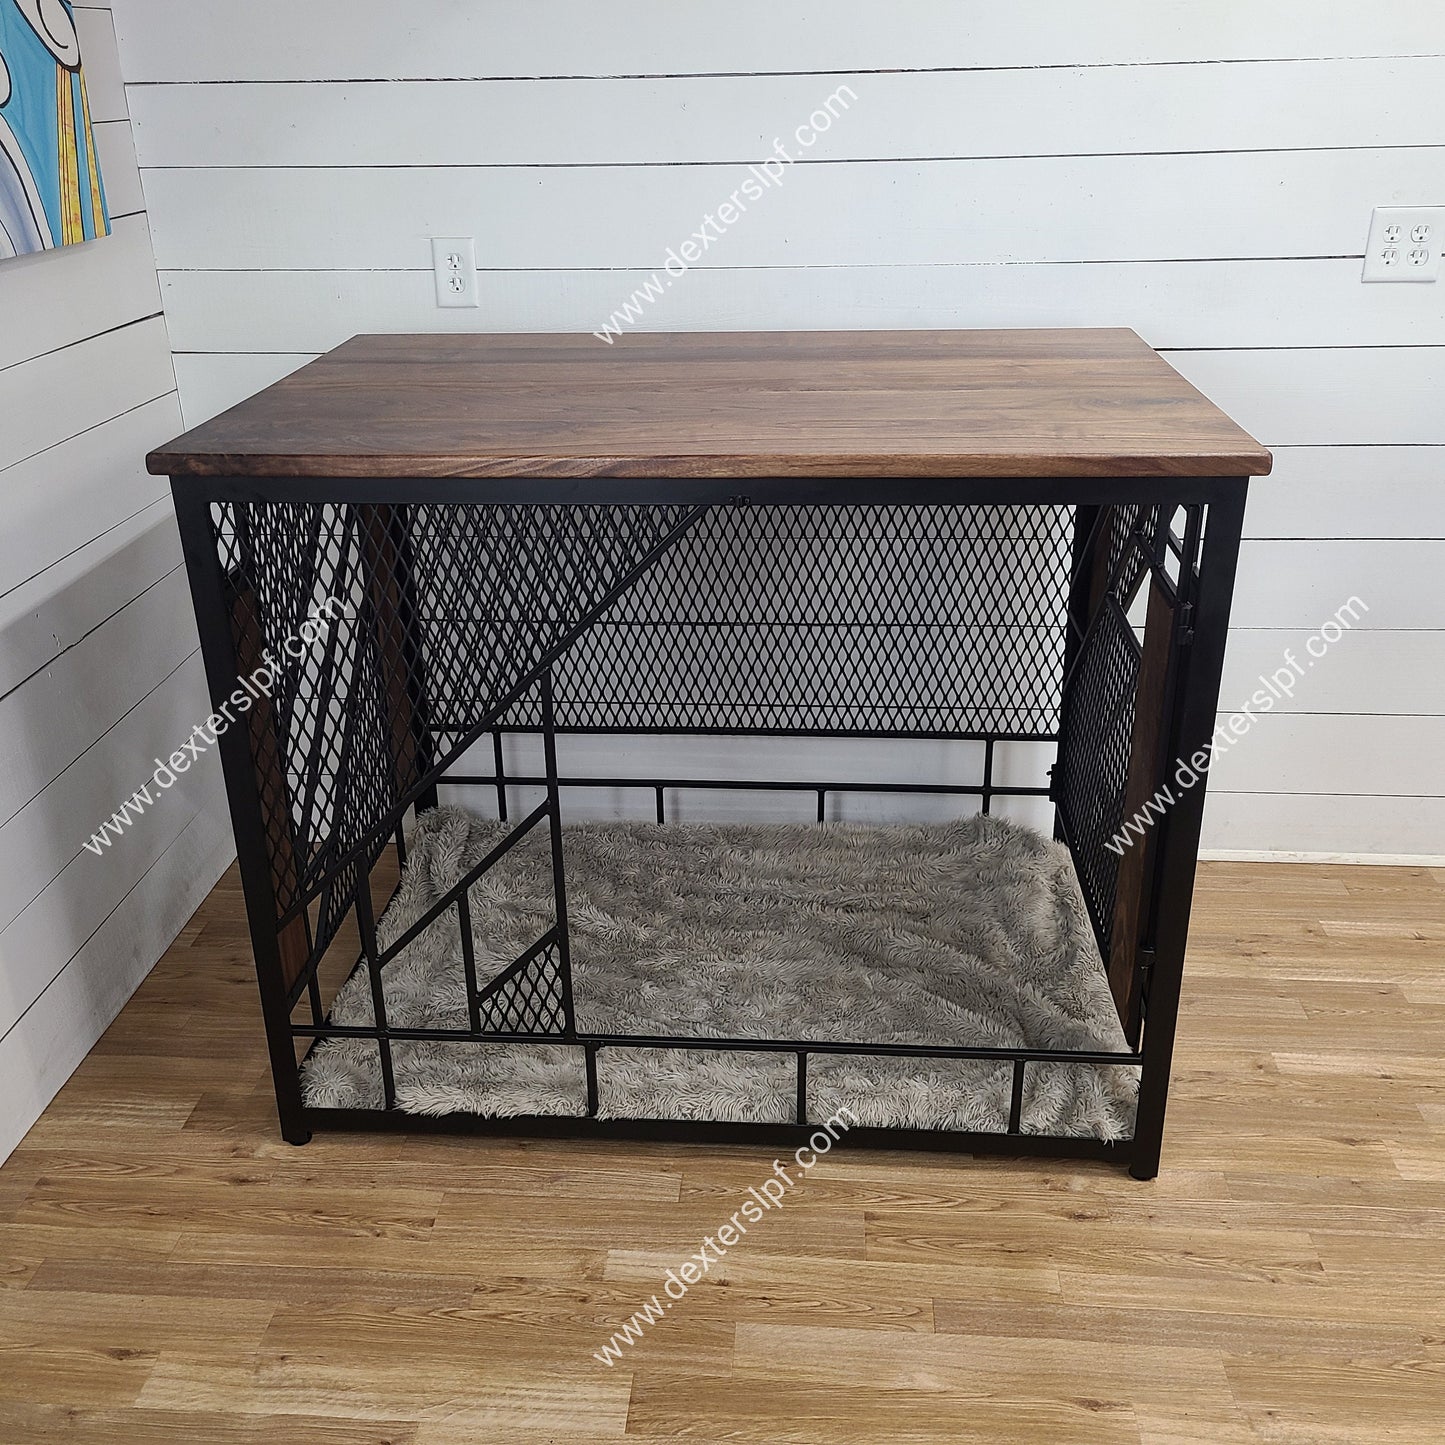 Remy XX-Large Dog Crate, Modern Dog Crate, Dog Crate Furniture, Dog Kennel Furniture, XXL Dog Kennel